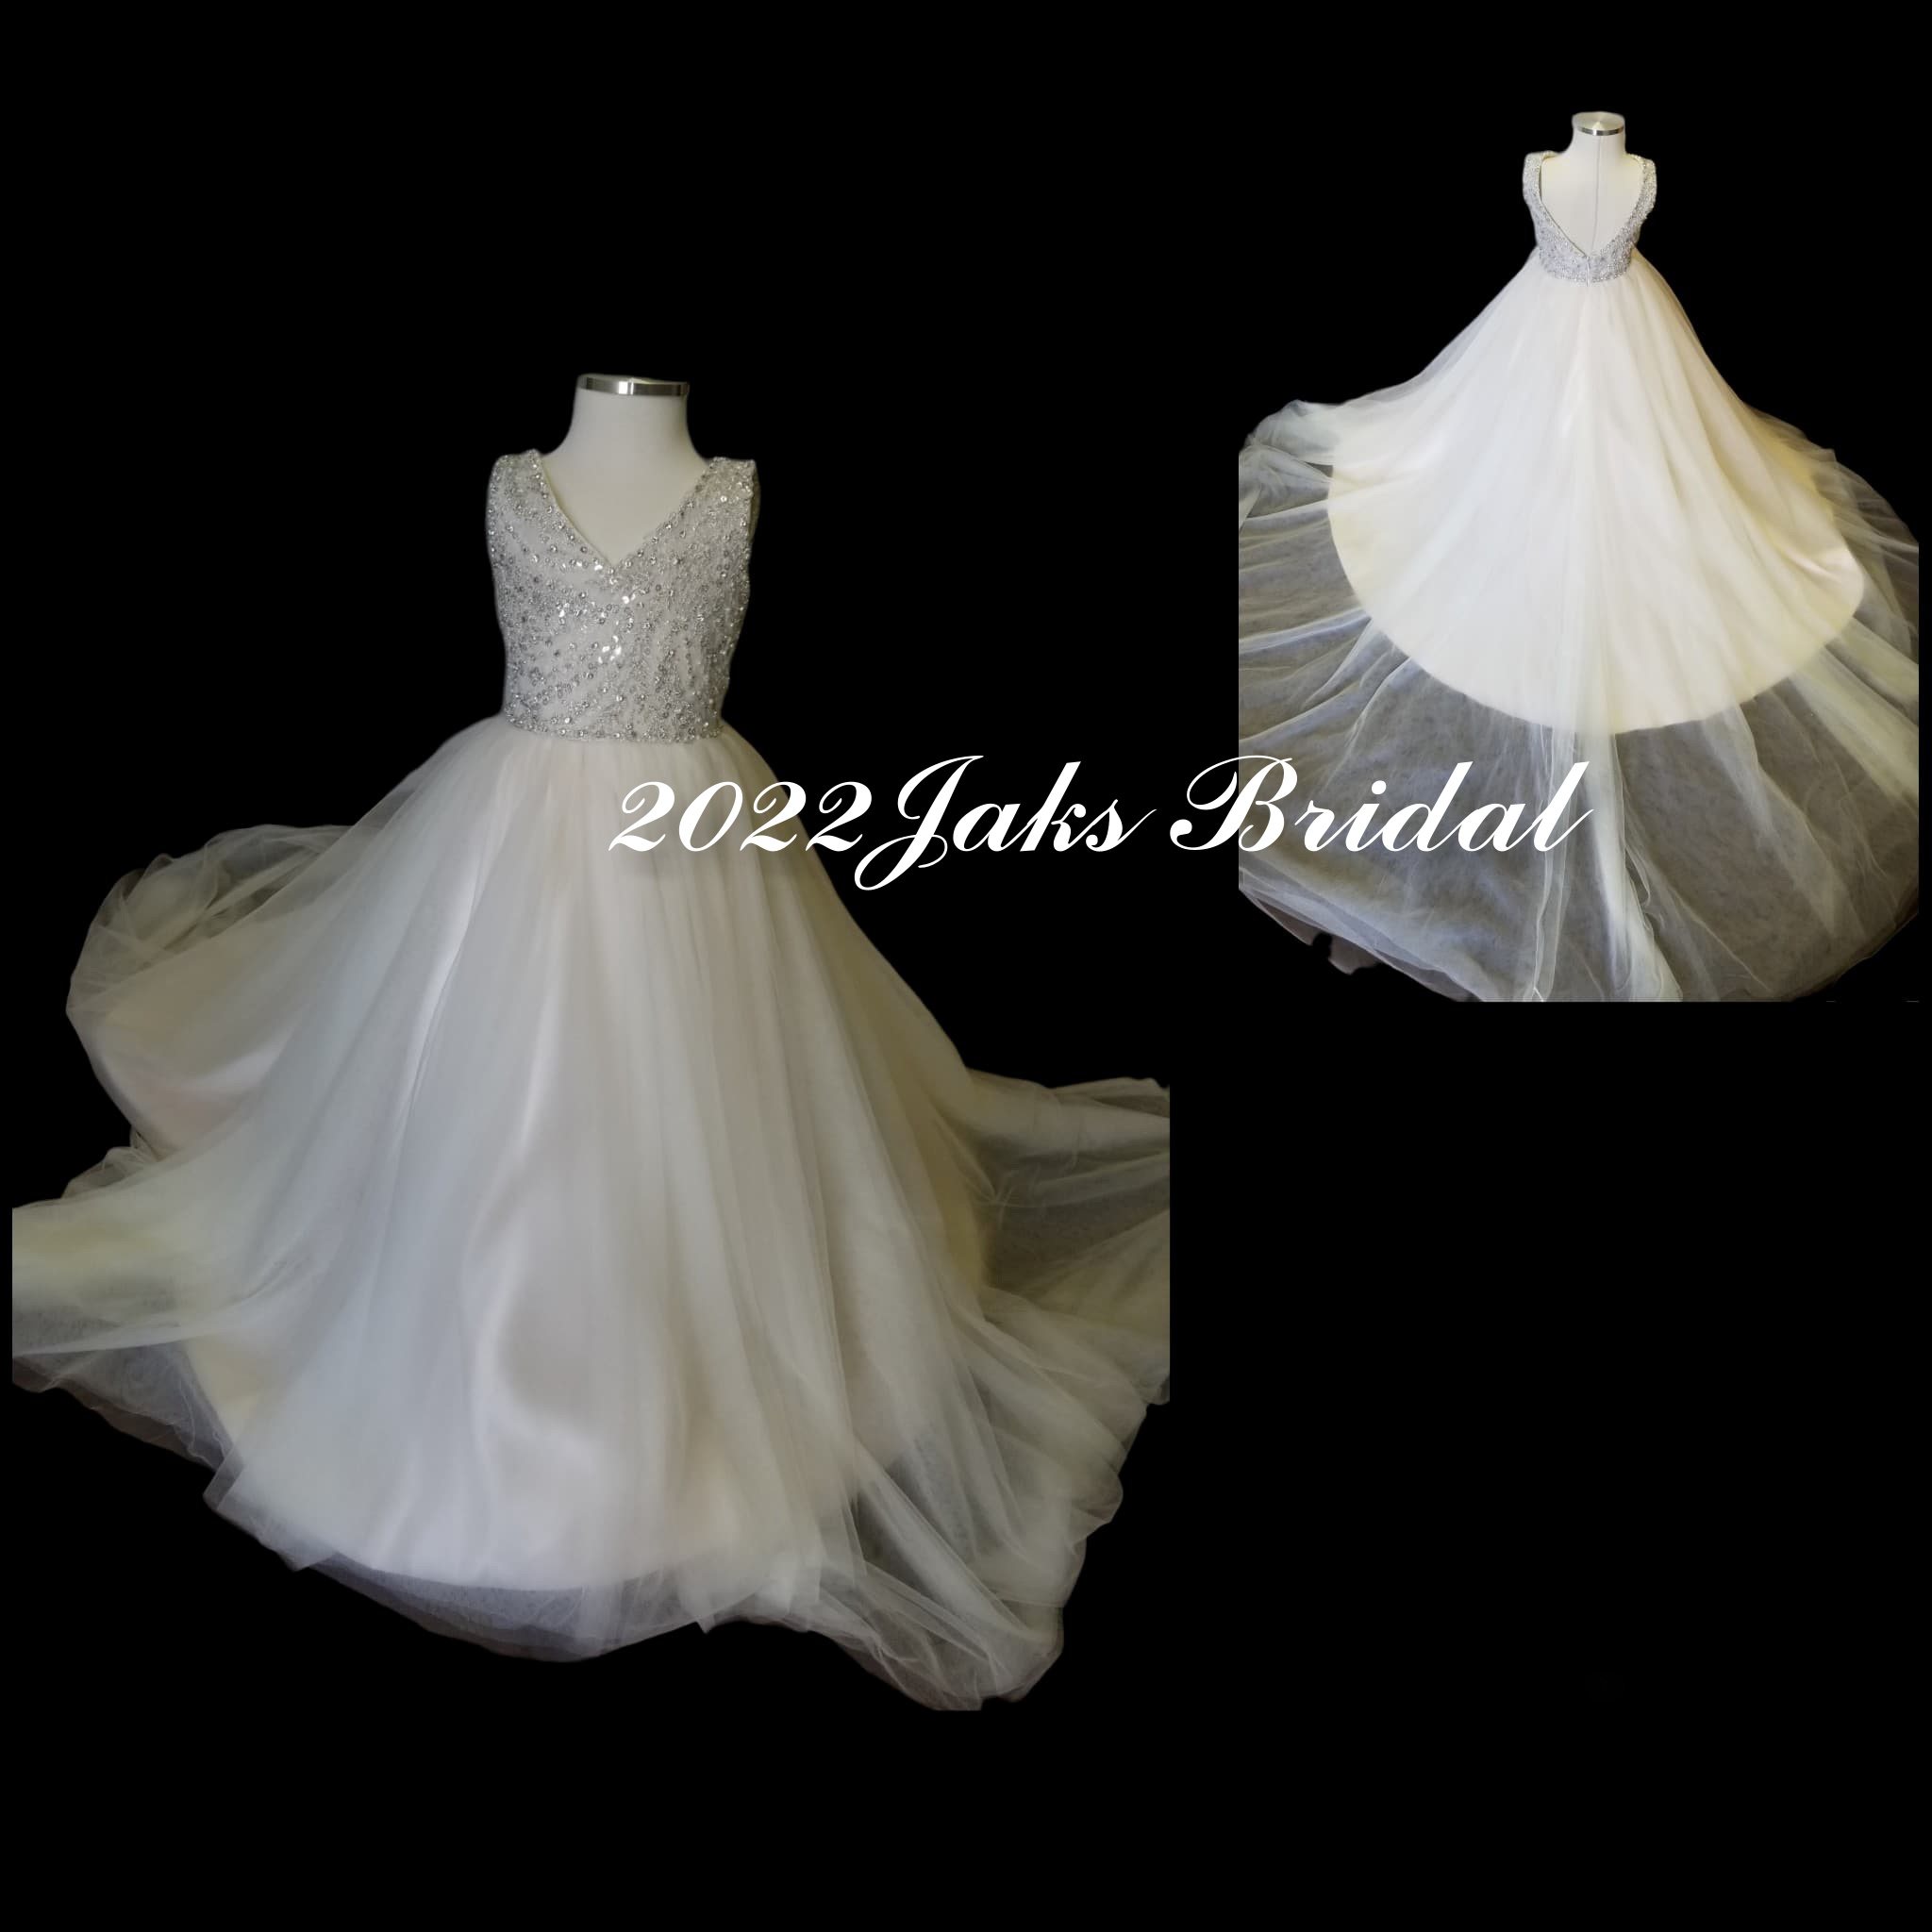 This ivory baby flower girl dress will be a hit at the wedding.